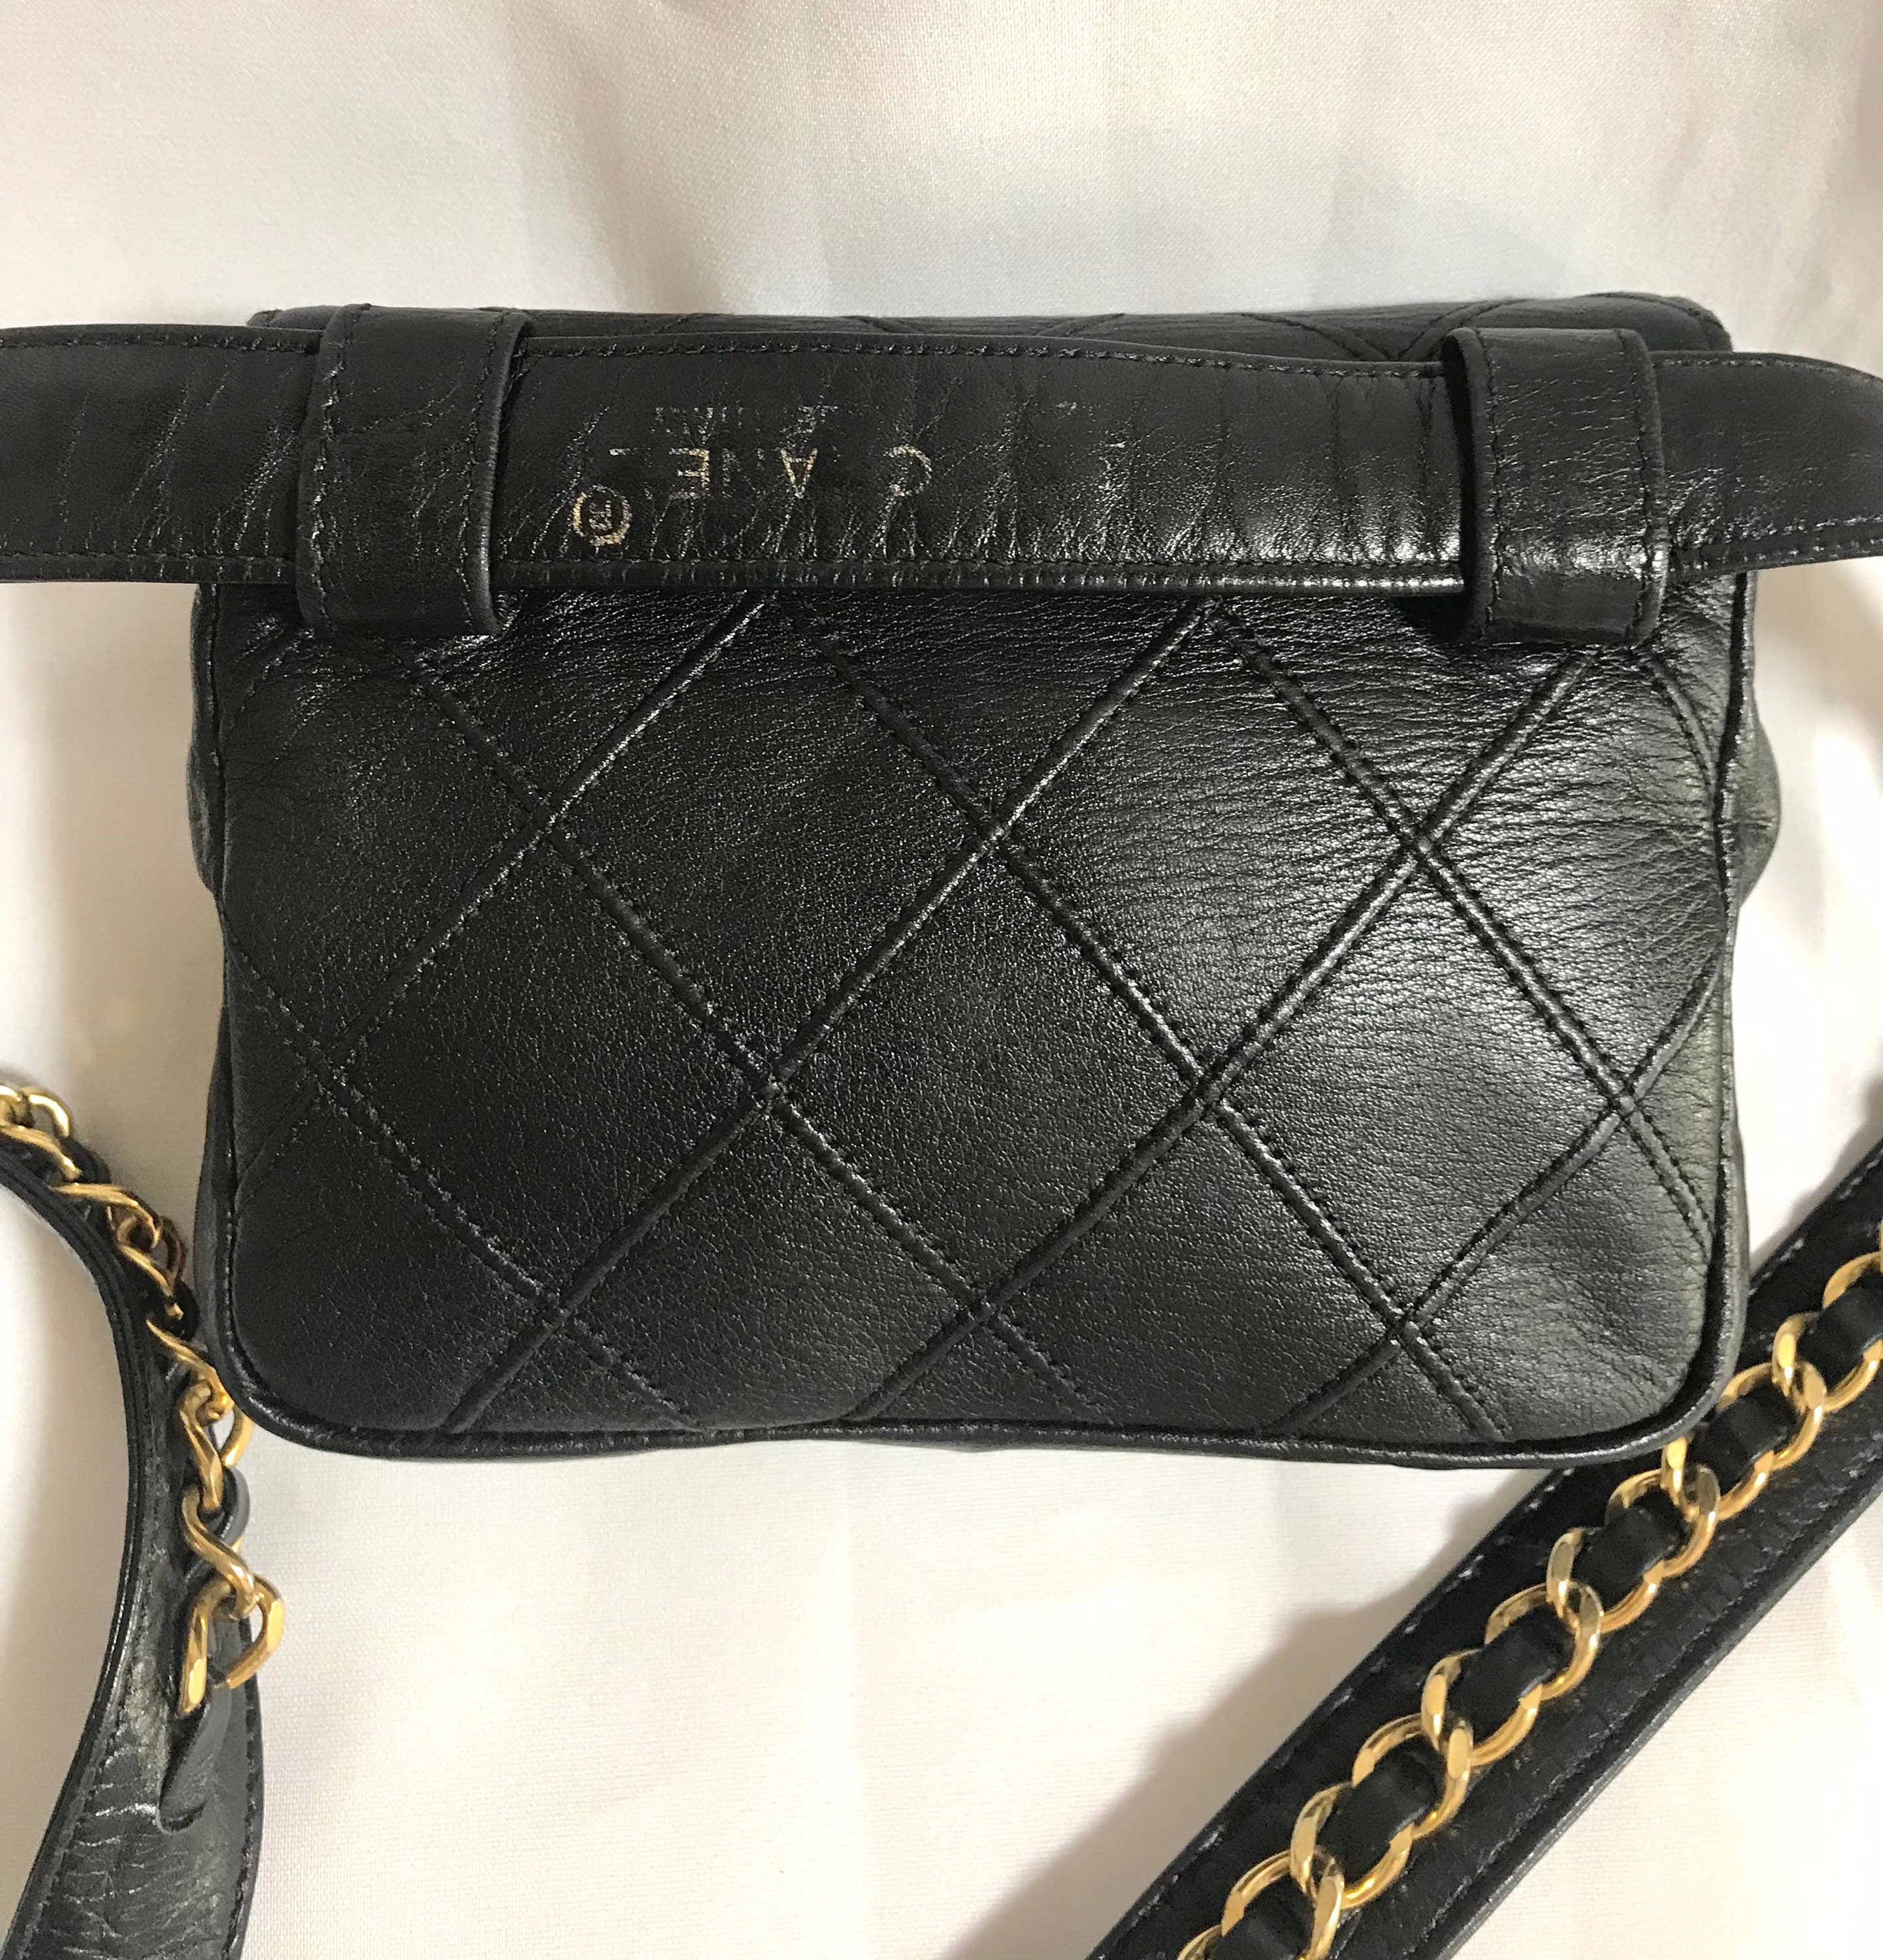 Chanel Brand New Vip Tennis Fanny Pack - Vintage Lux